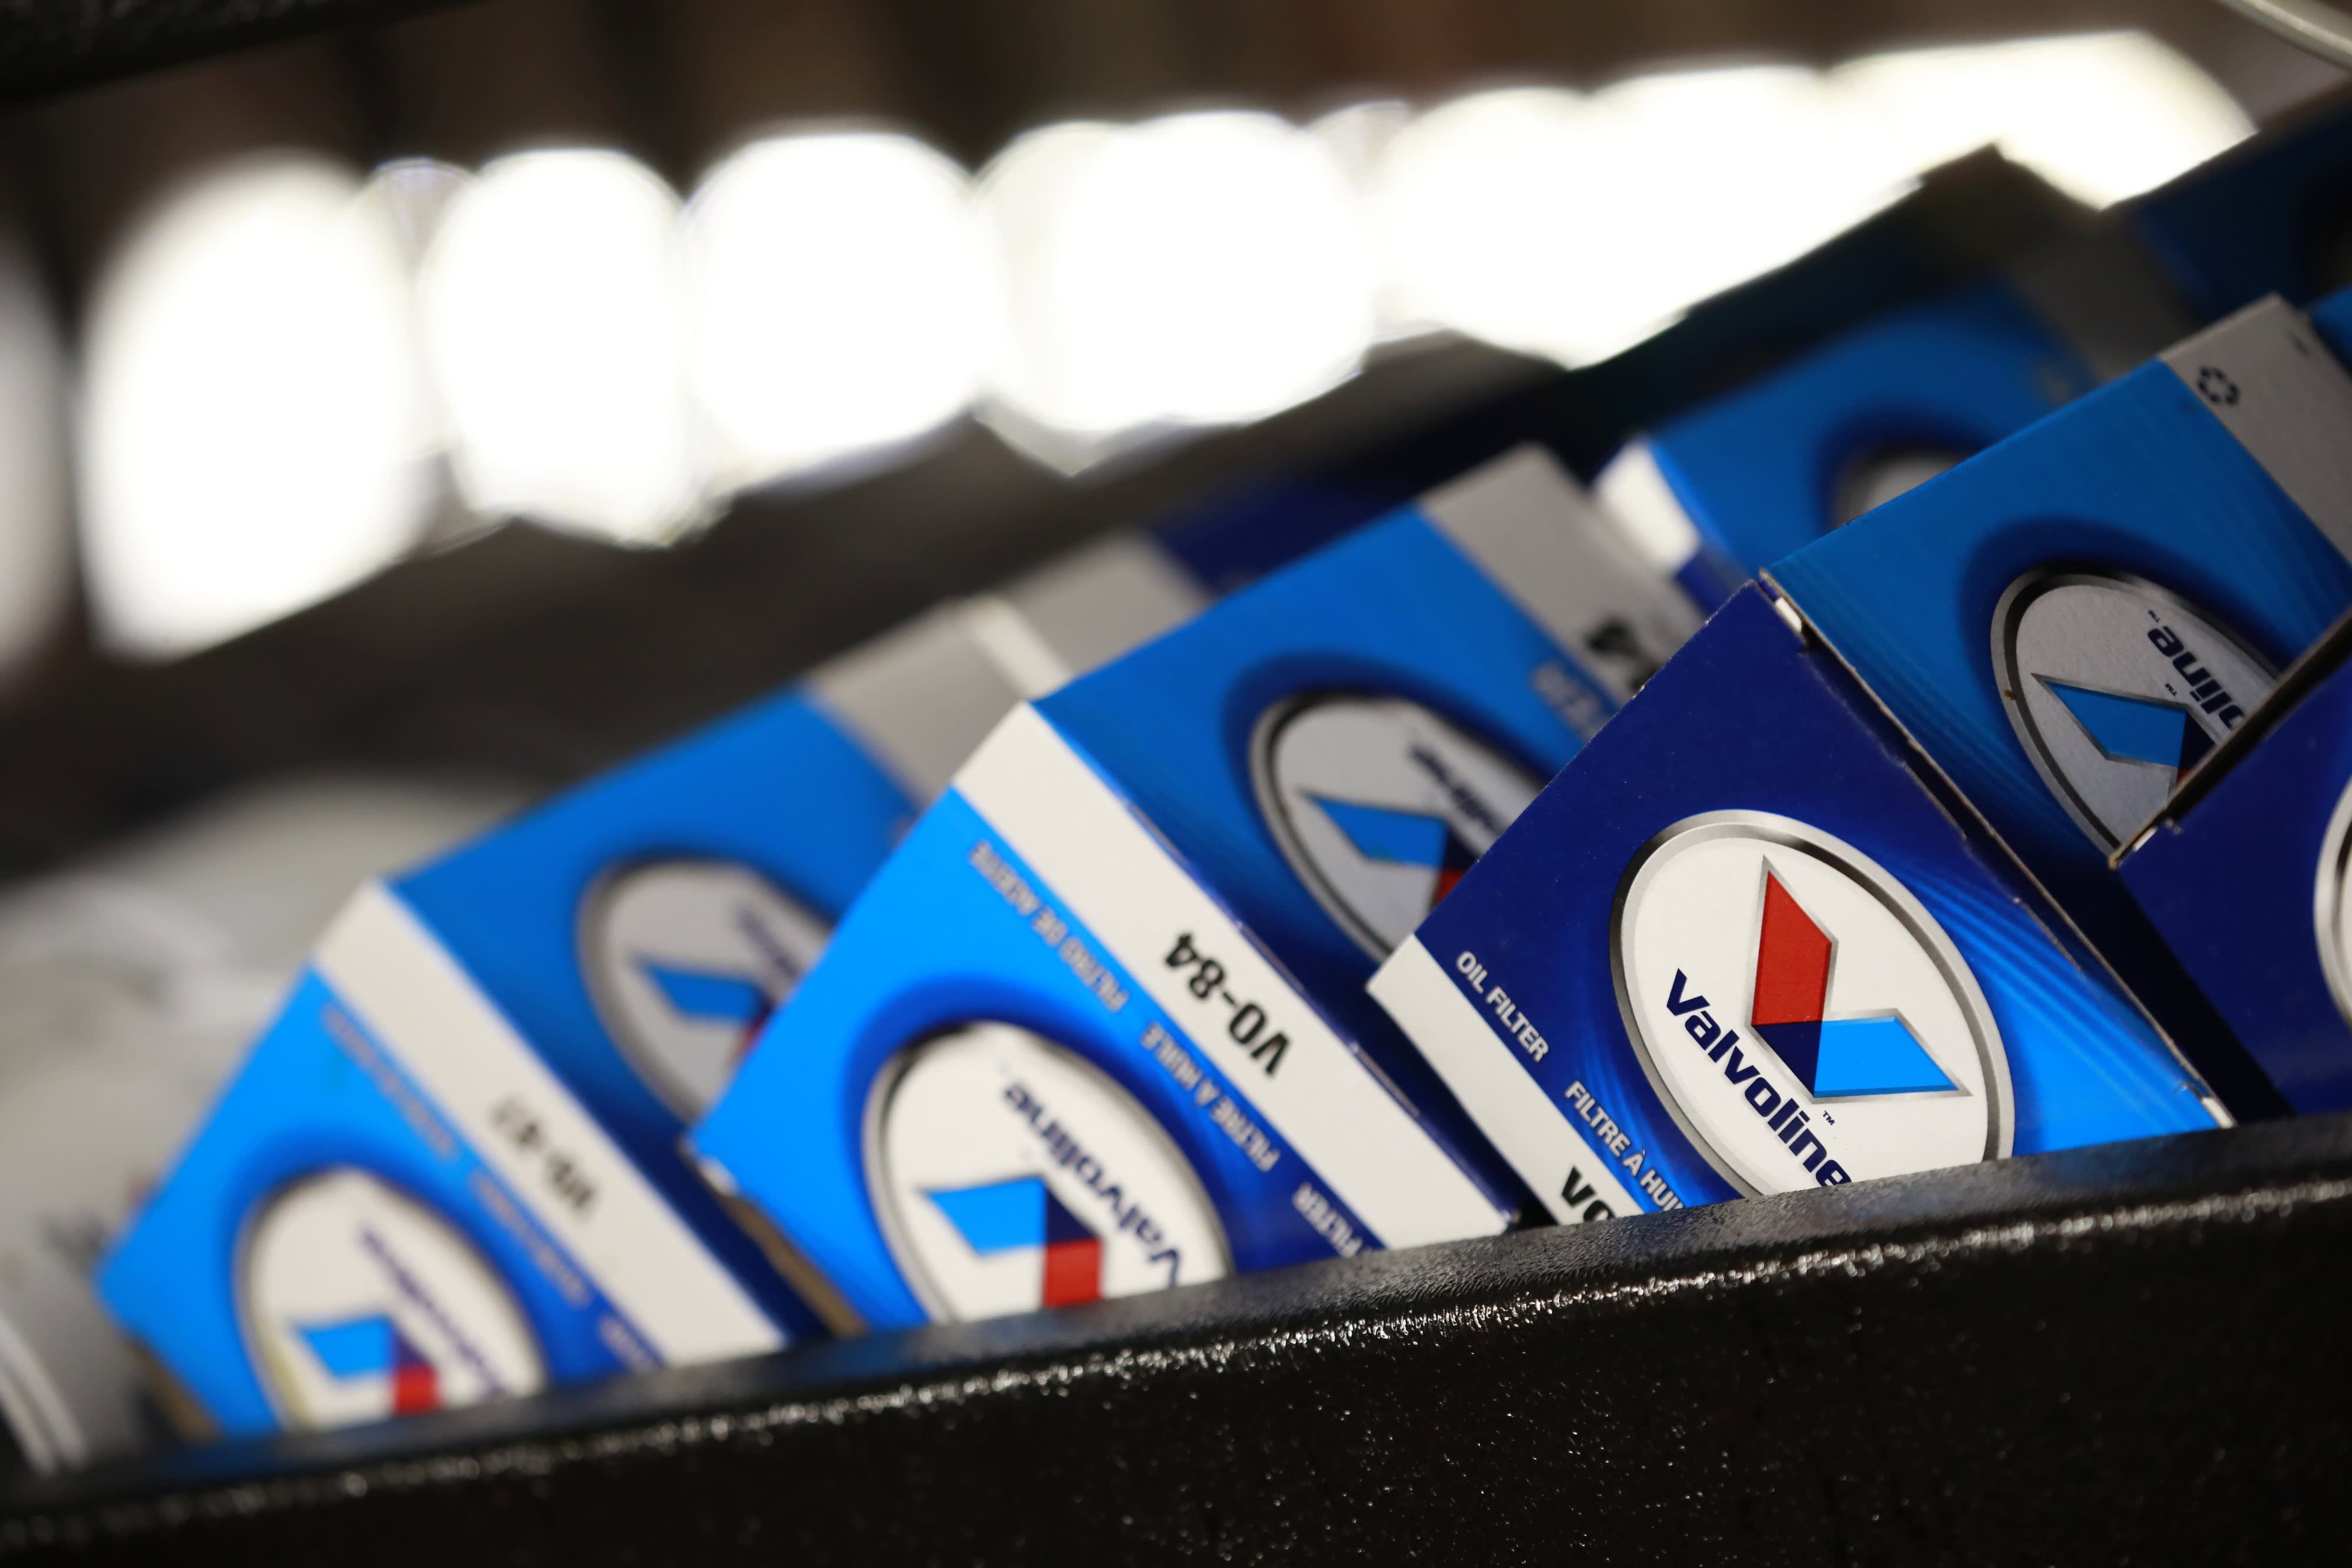 Valvoline will be a 'faster growing' business after a planned split, RBC says in new outperform rating